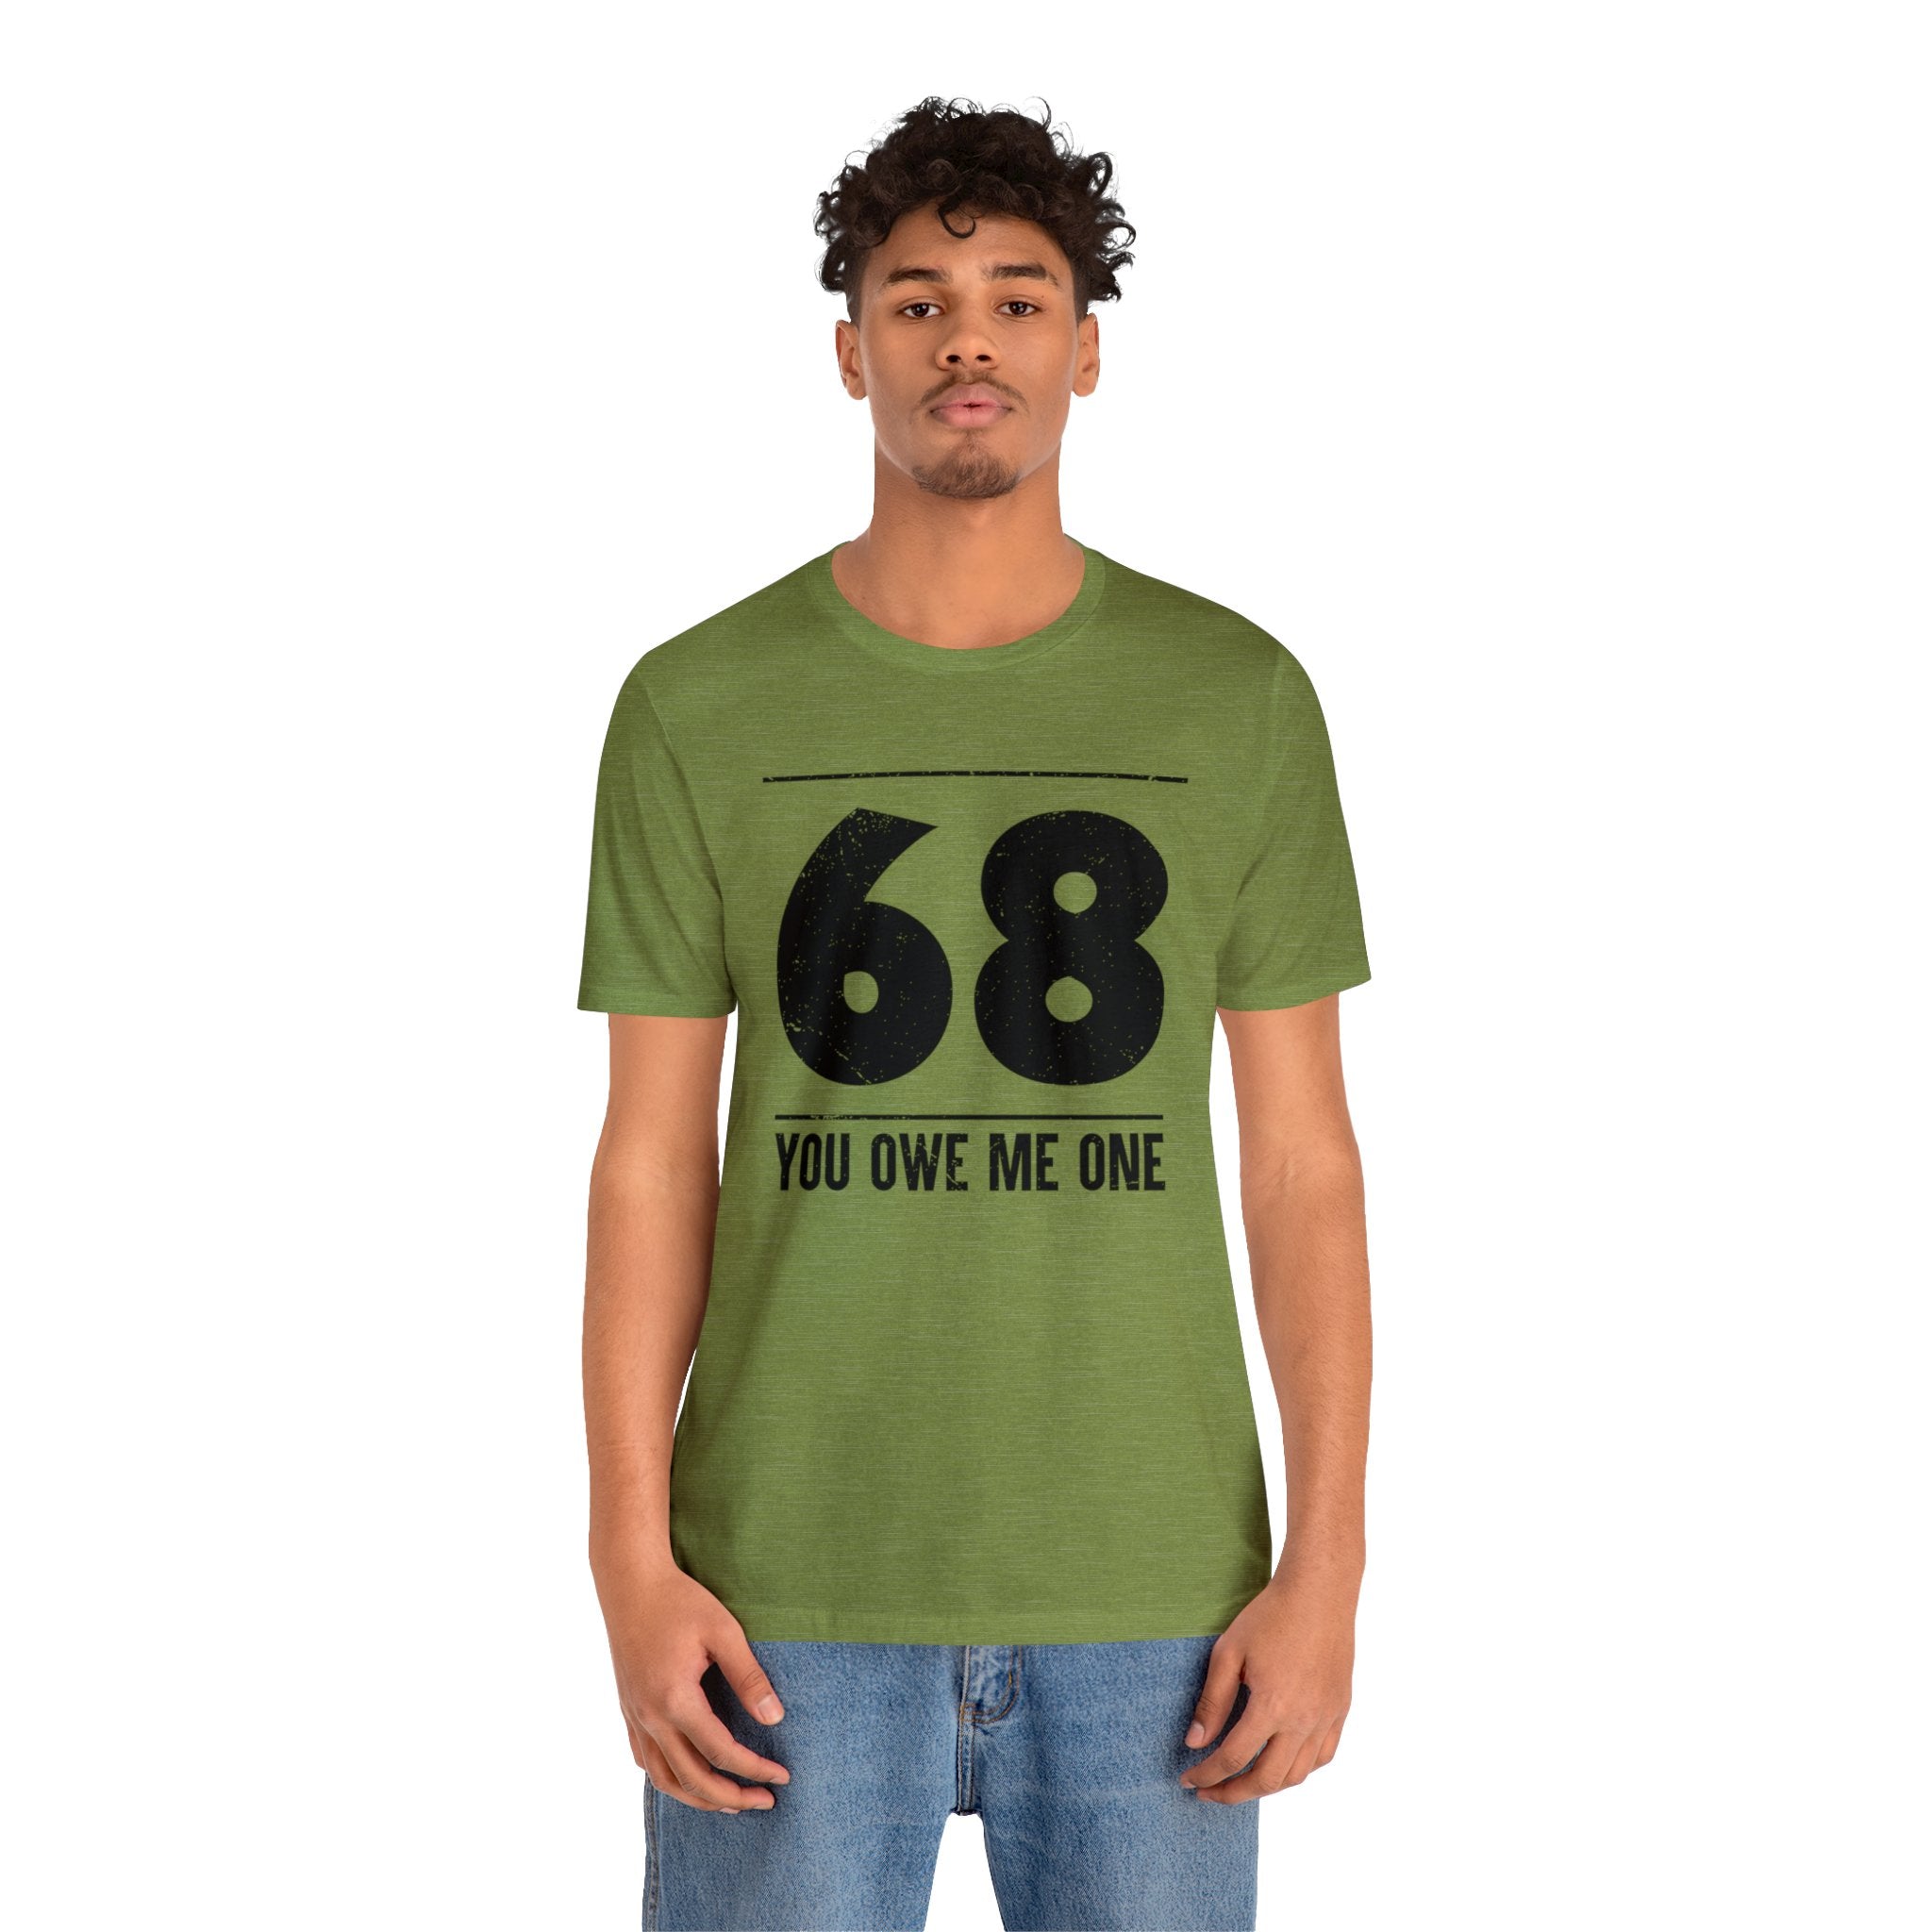 A man wearing a geeky green shirt that says '68 you owe me one'.